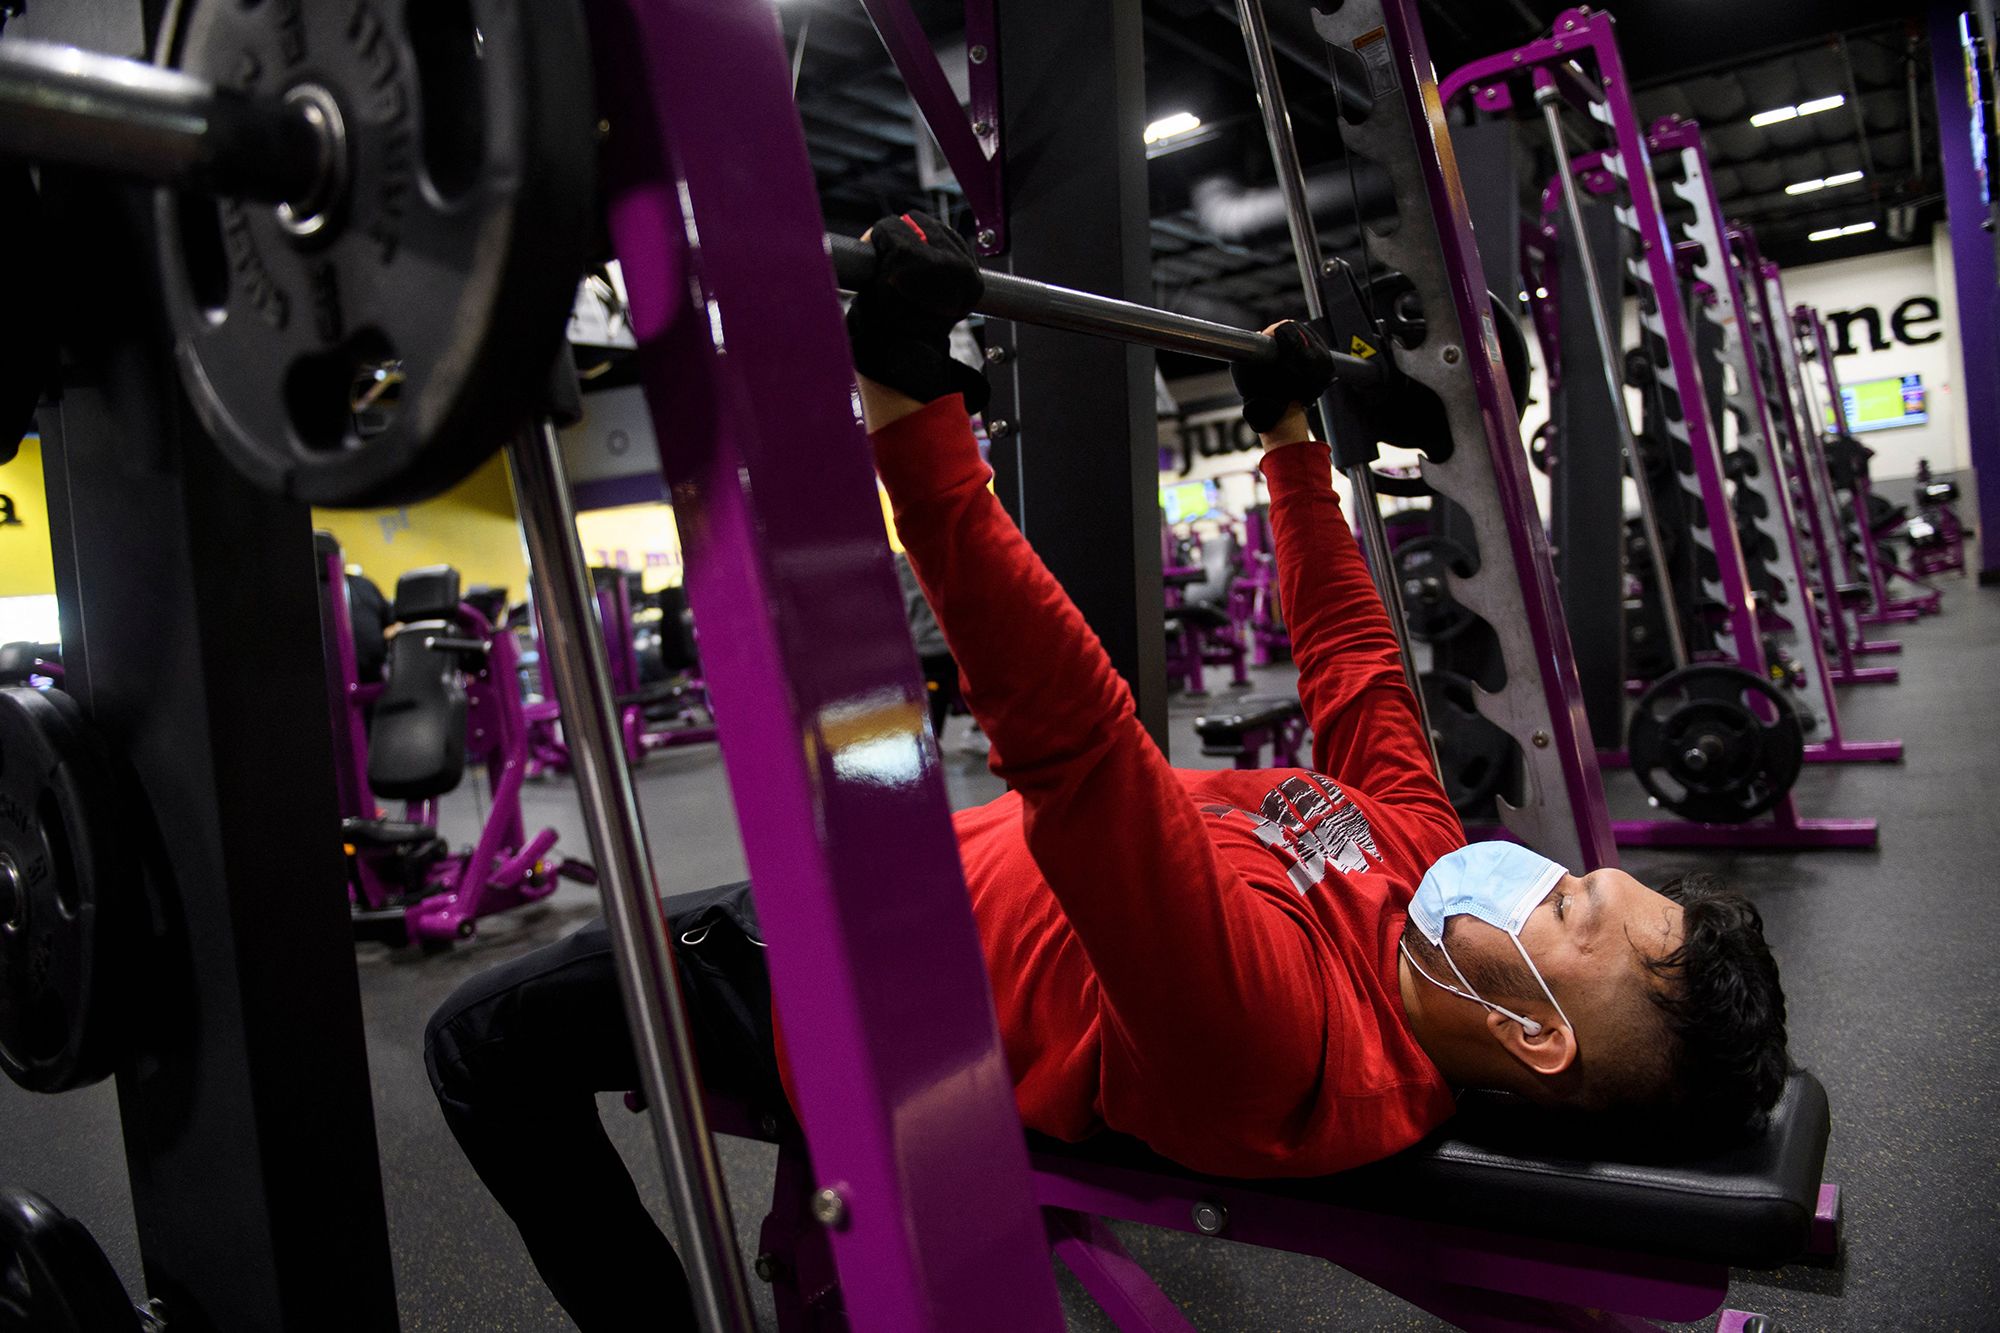 Americans have changed the way they exercise. Here's how gyms are adapting